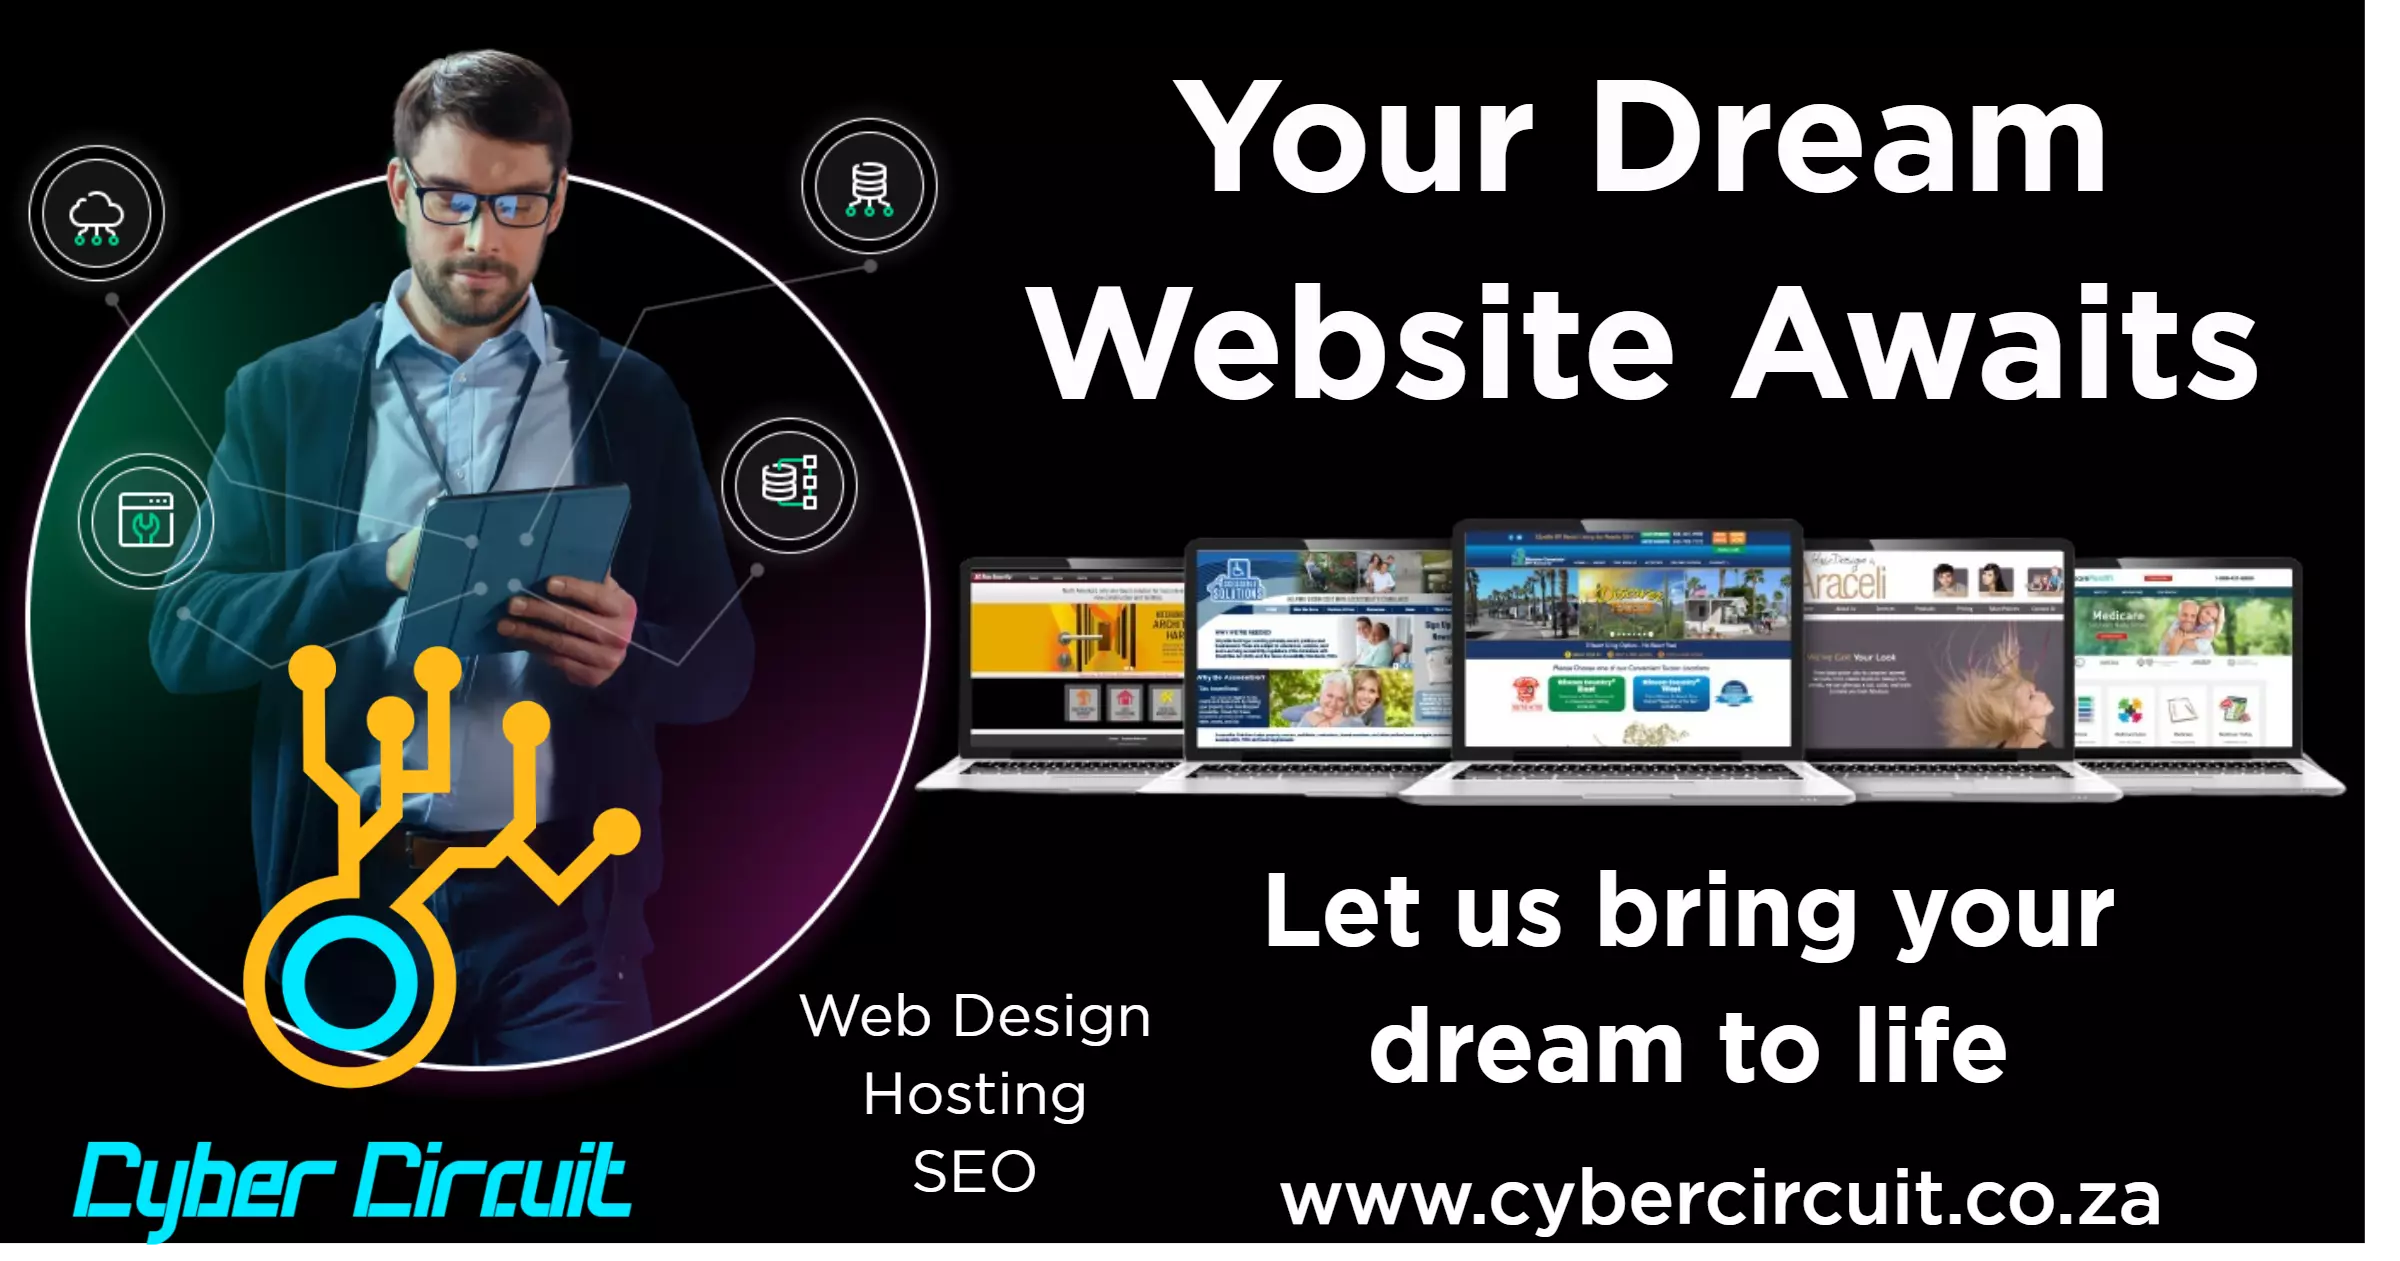 Web design centurion banner image with the words "your dream website awaits" written on it